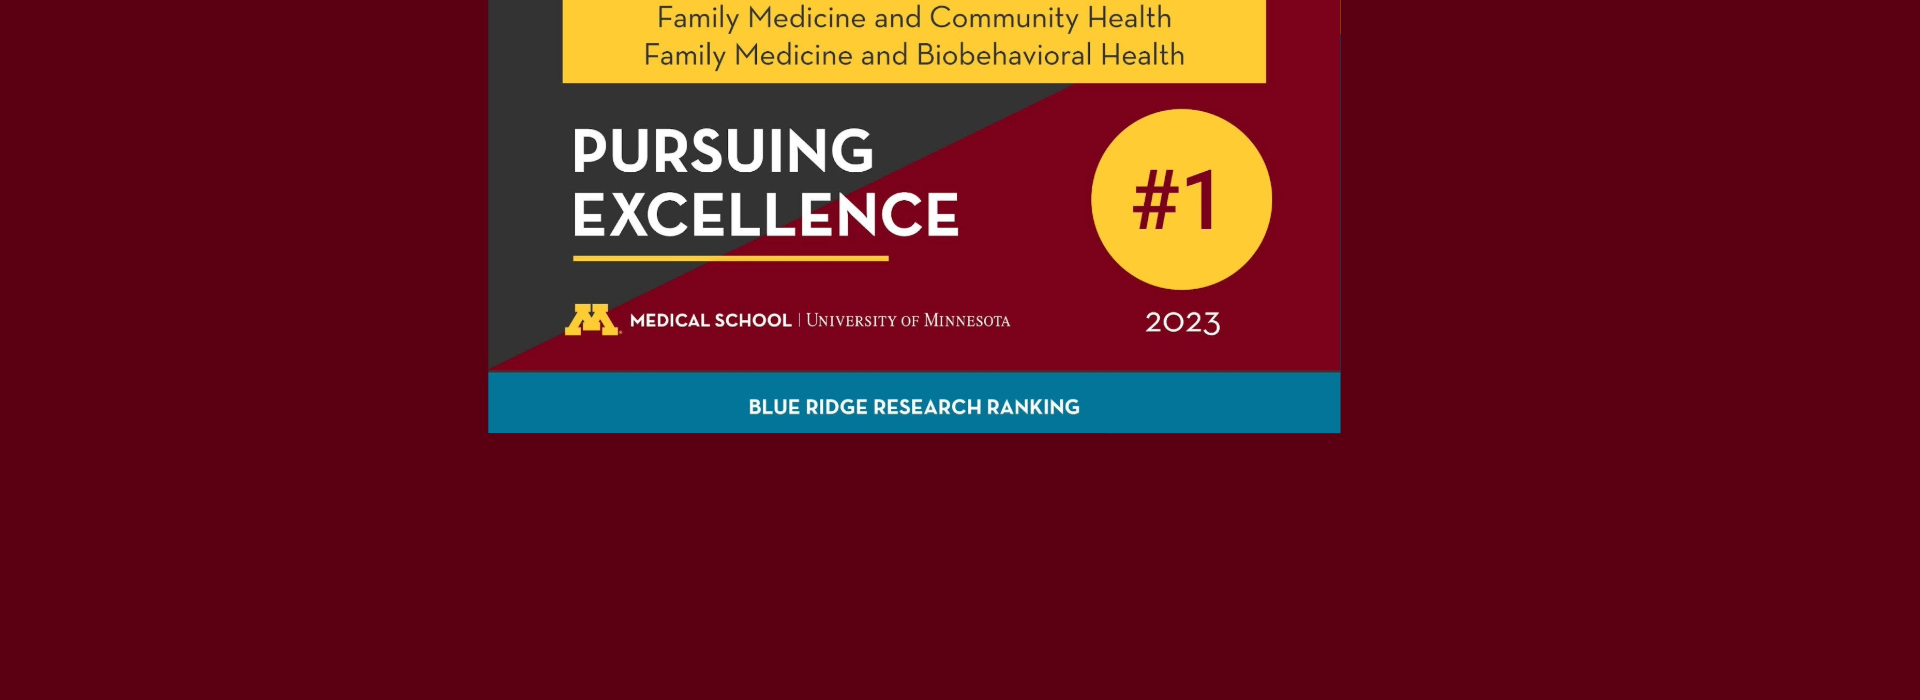 Family medicine across the University of Minnesota Medical School, among all family medicine departments in the United States, has achieved the top Blue Ridge Ranking for NIH funding and is now nationally ranked #1.